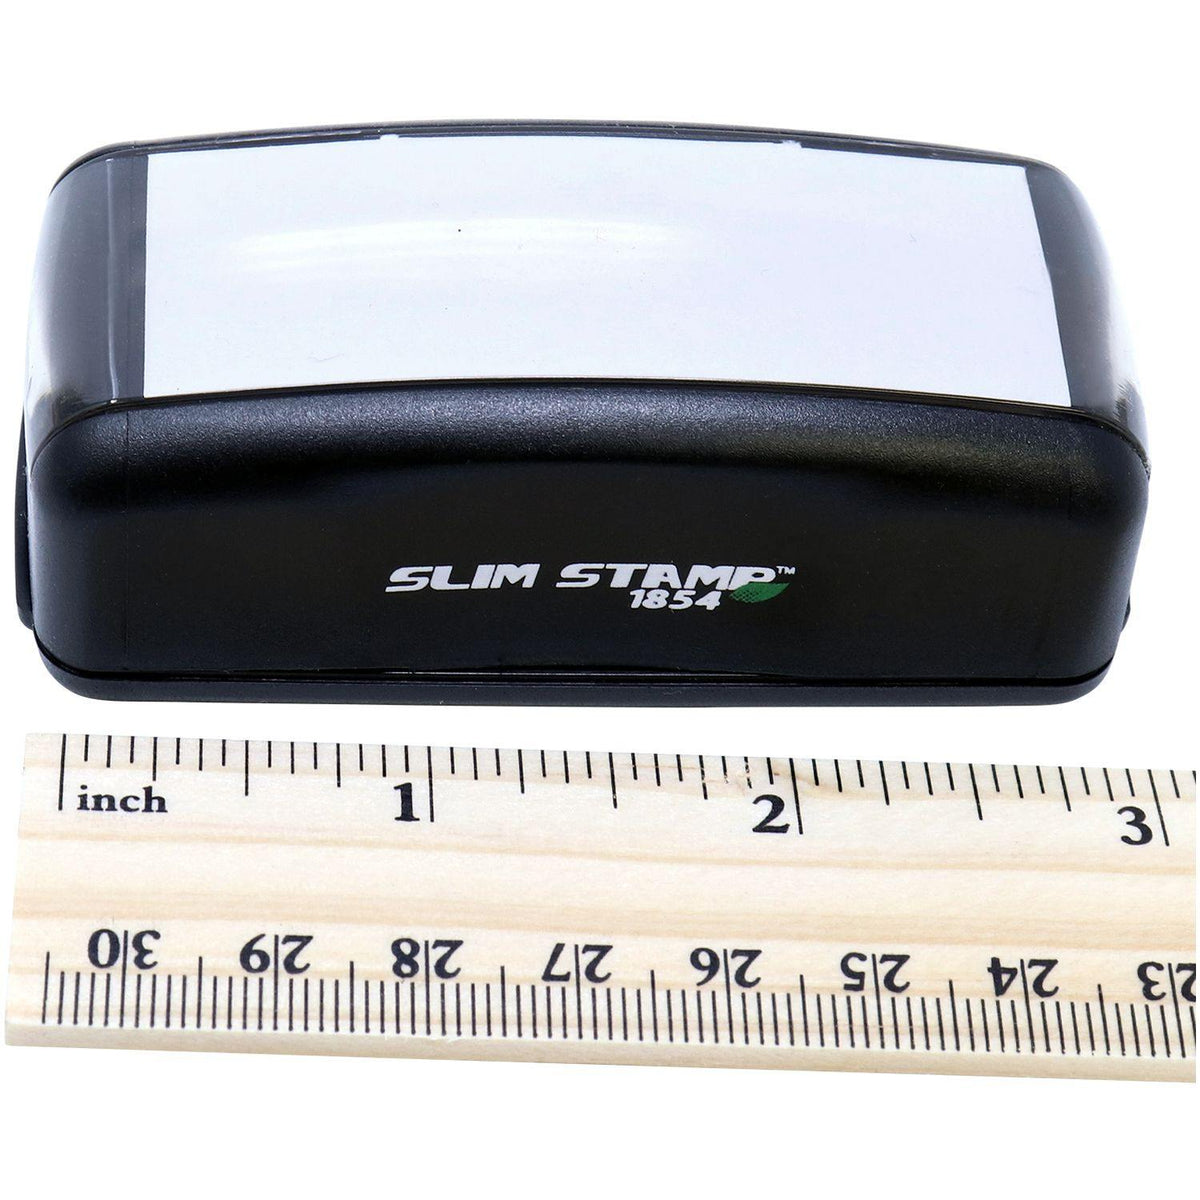 Measurement Large Pre-Inked Remitido Stamp with Ruler